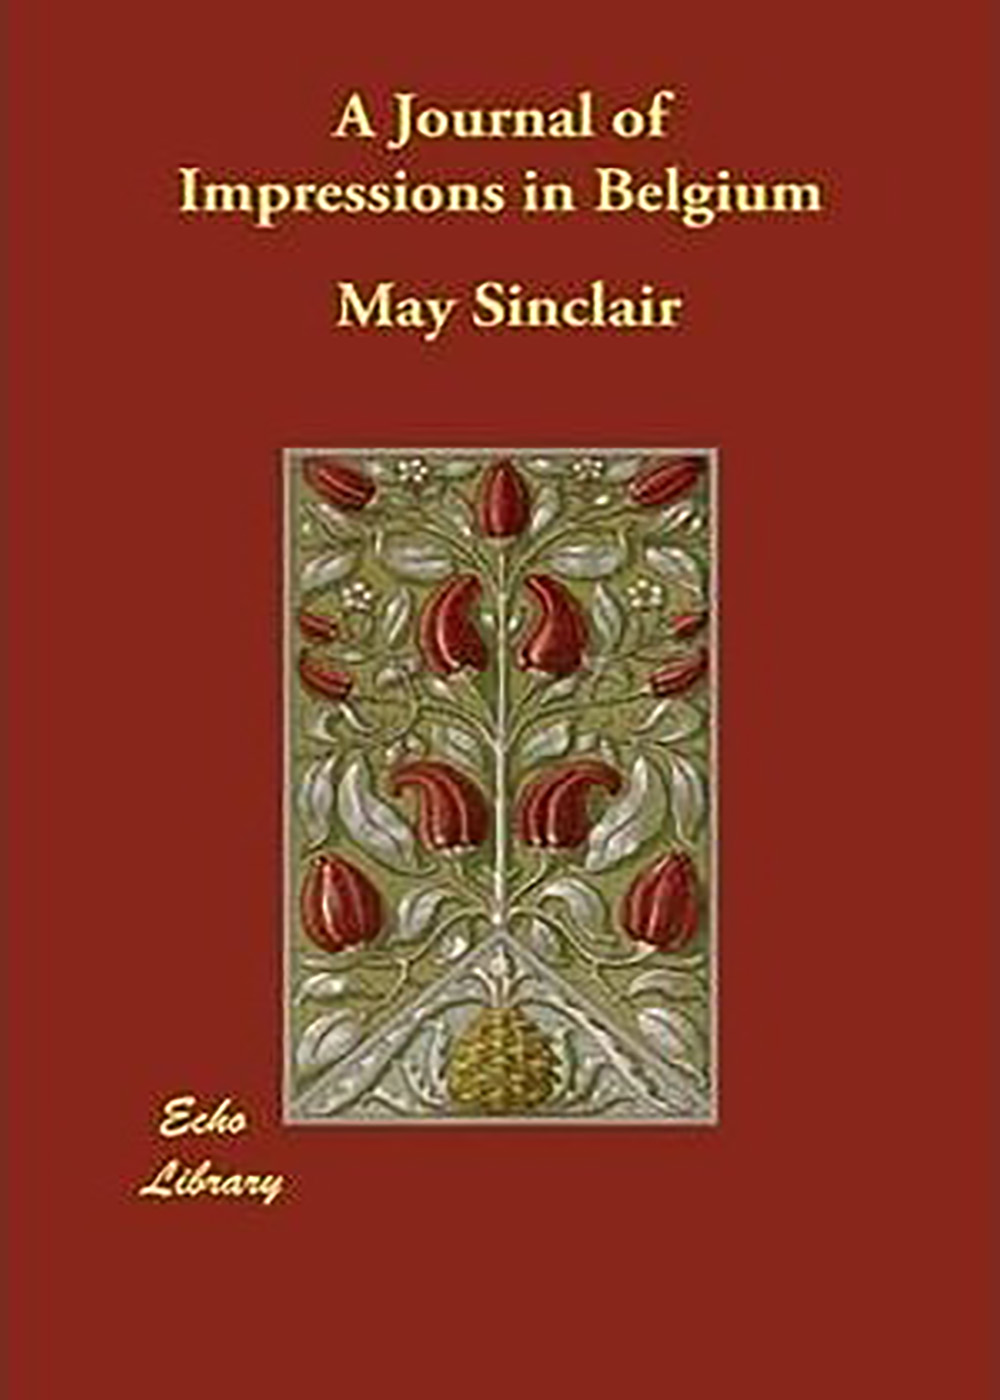 May Sinclair - A Journal of Impressions in Belgium